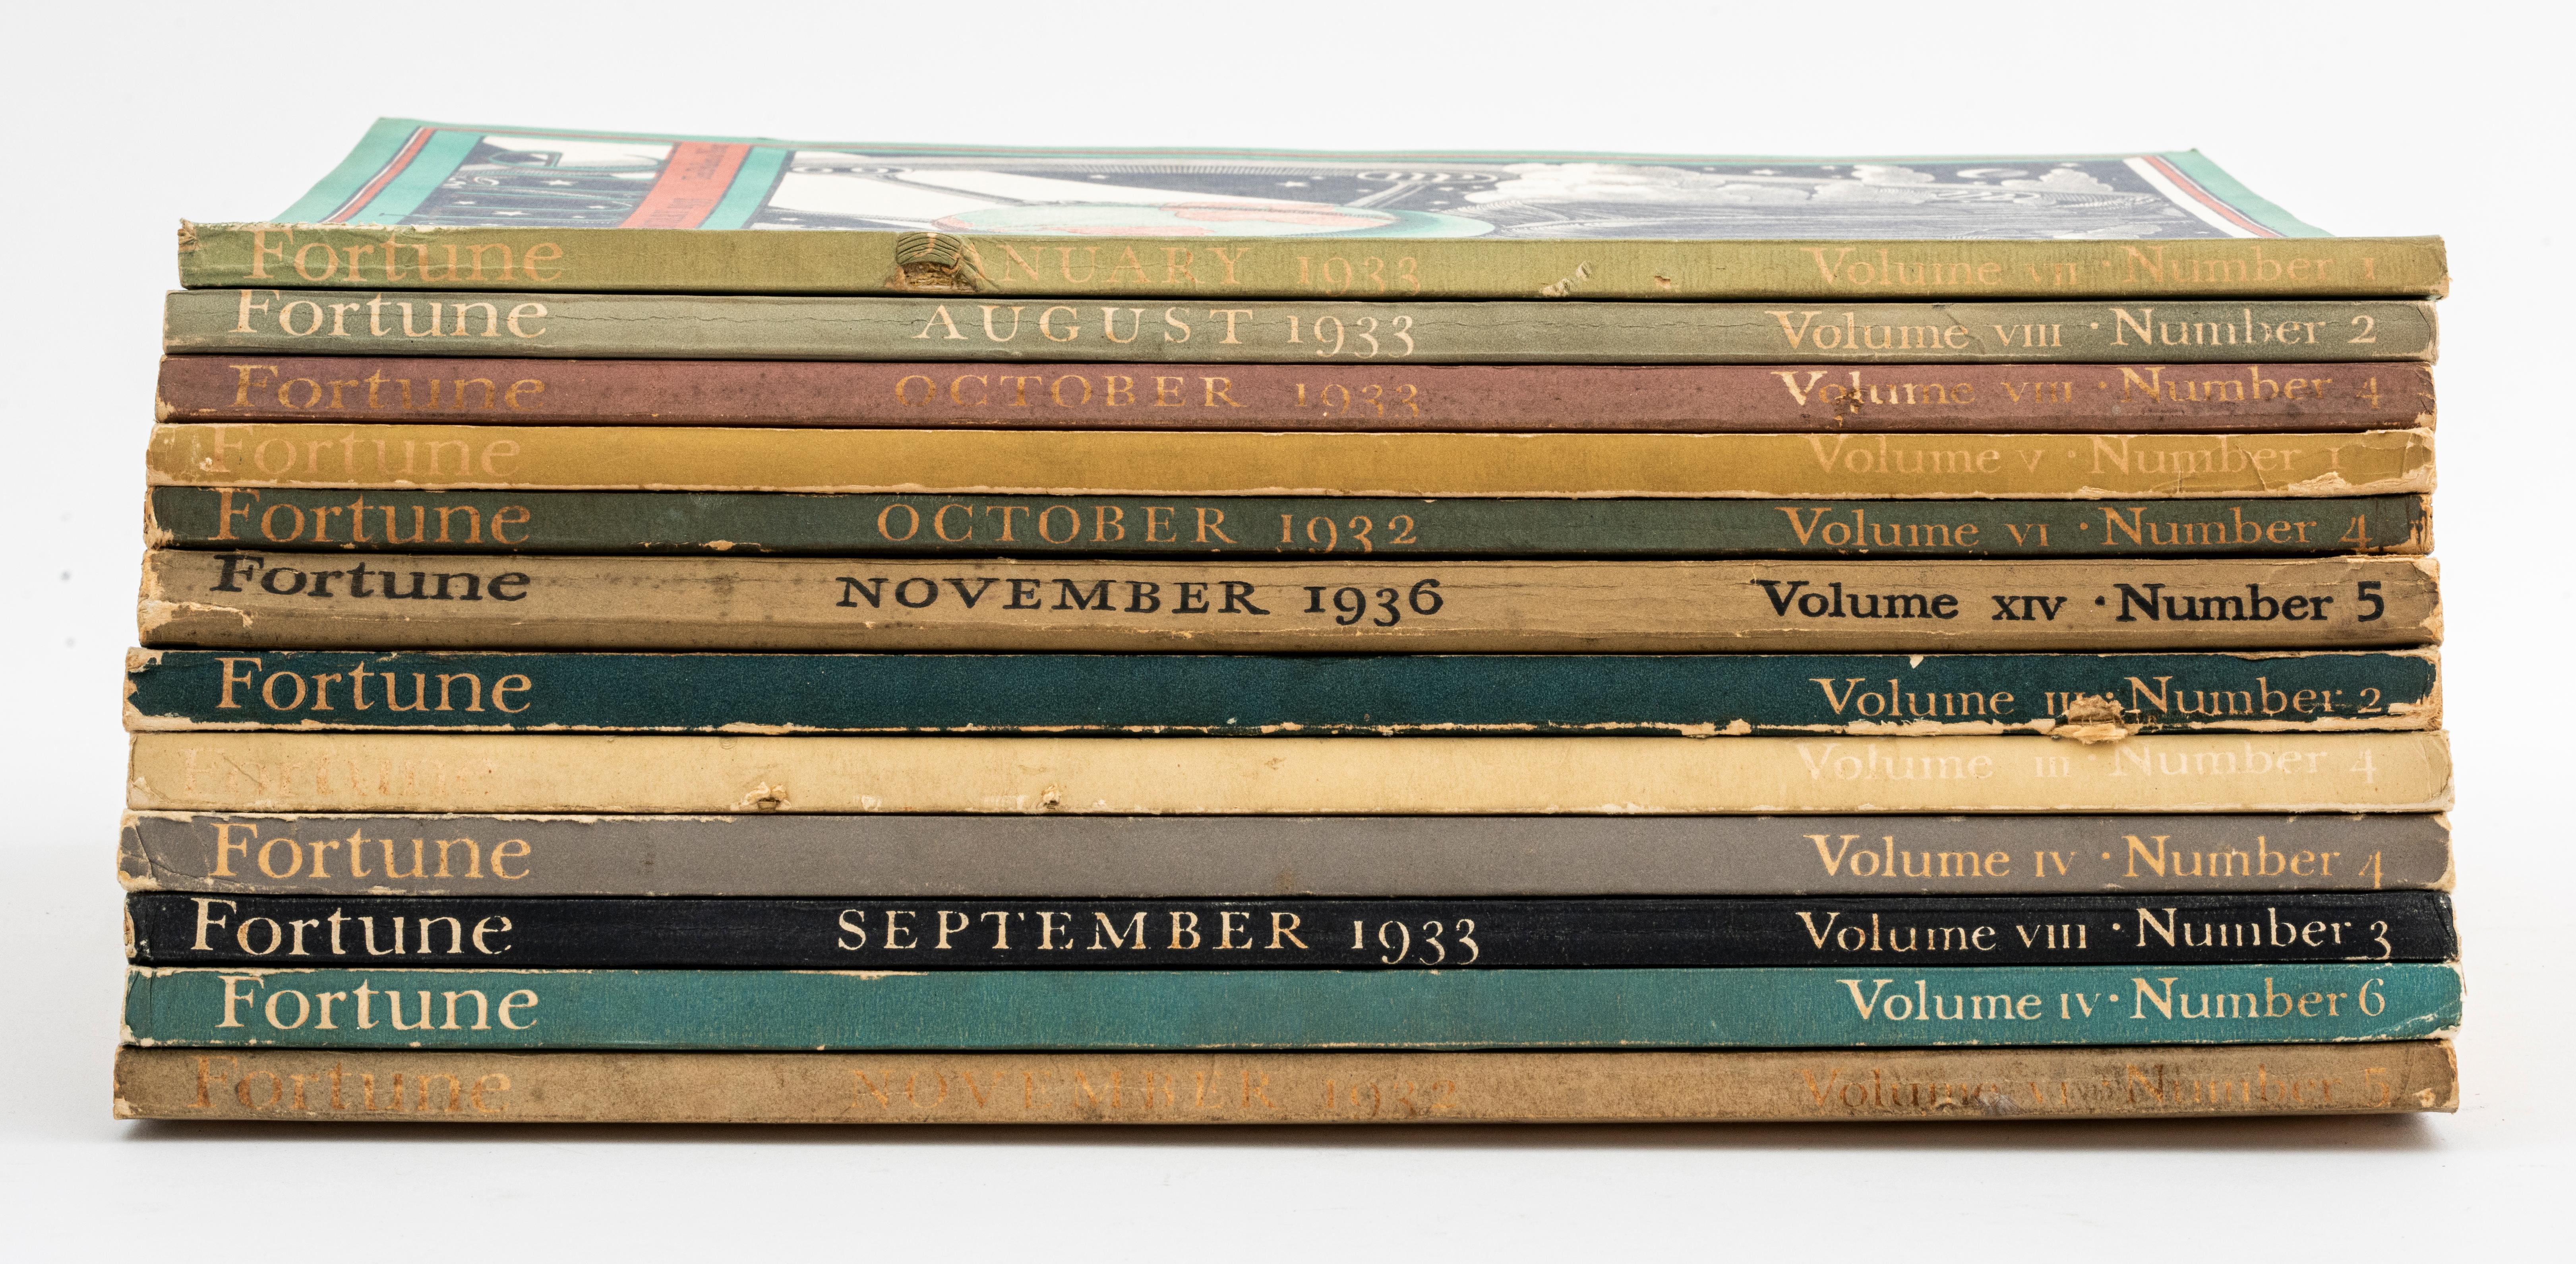 Almost a complete set of Fortune Magazines, beginning with the first issue dated February 1930 and going through 1947. The remarkable covers that are graphically stunning, the era-specific advertisements, and the in depth stories, which are fully